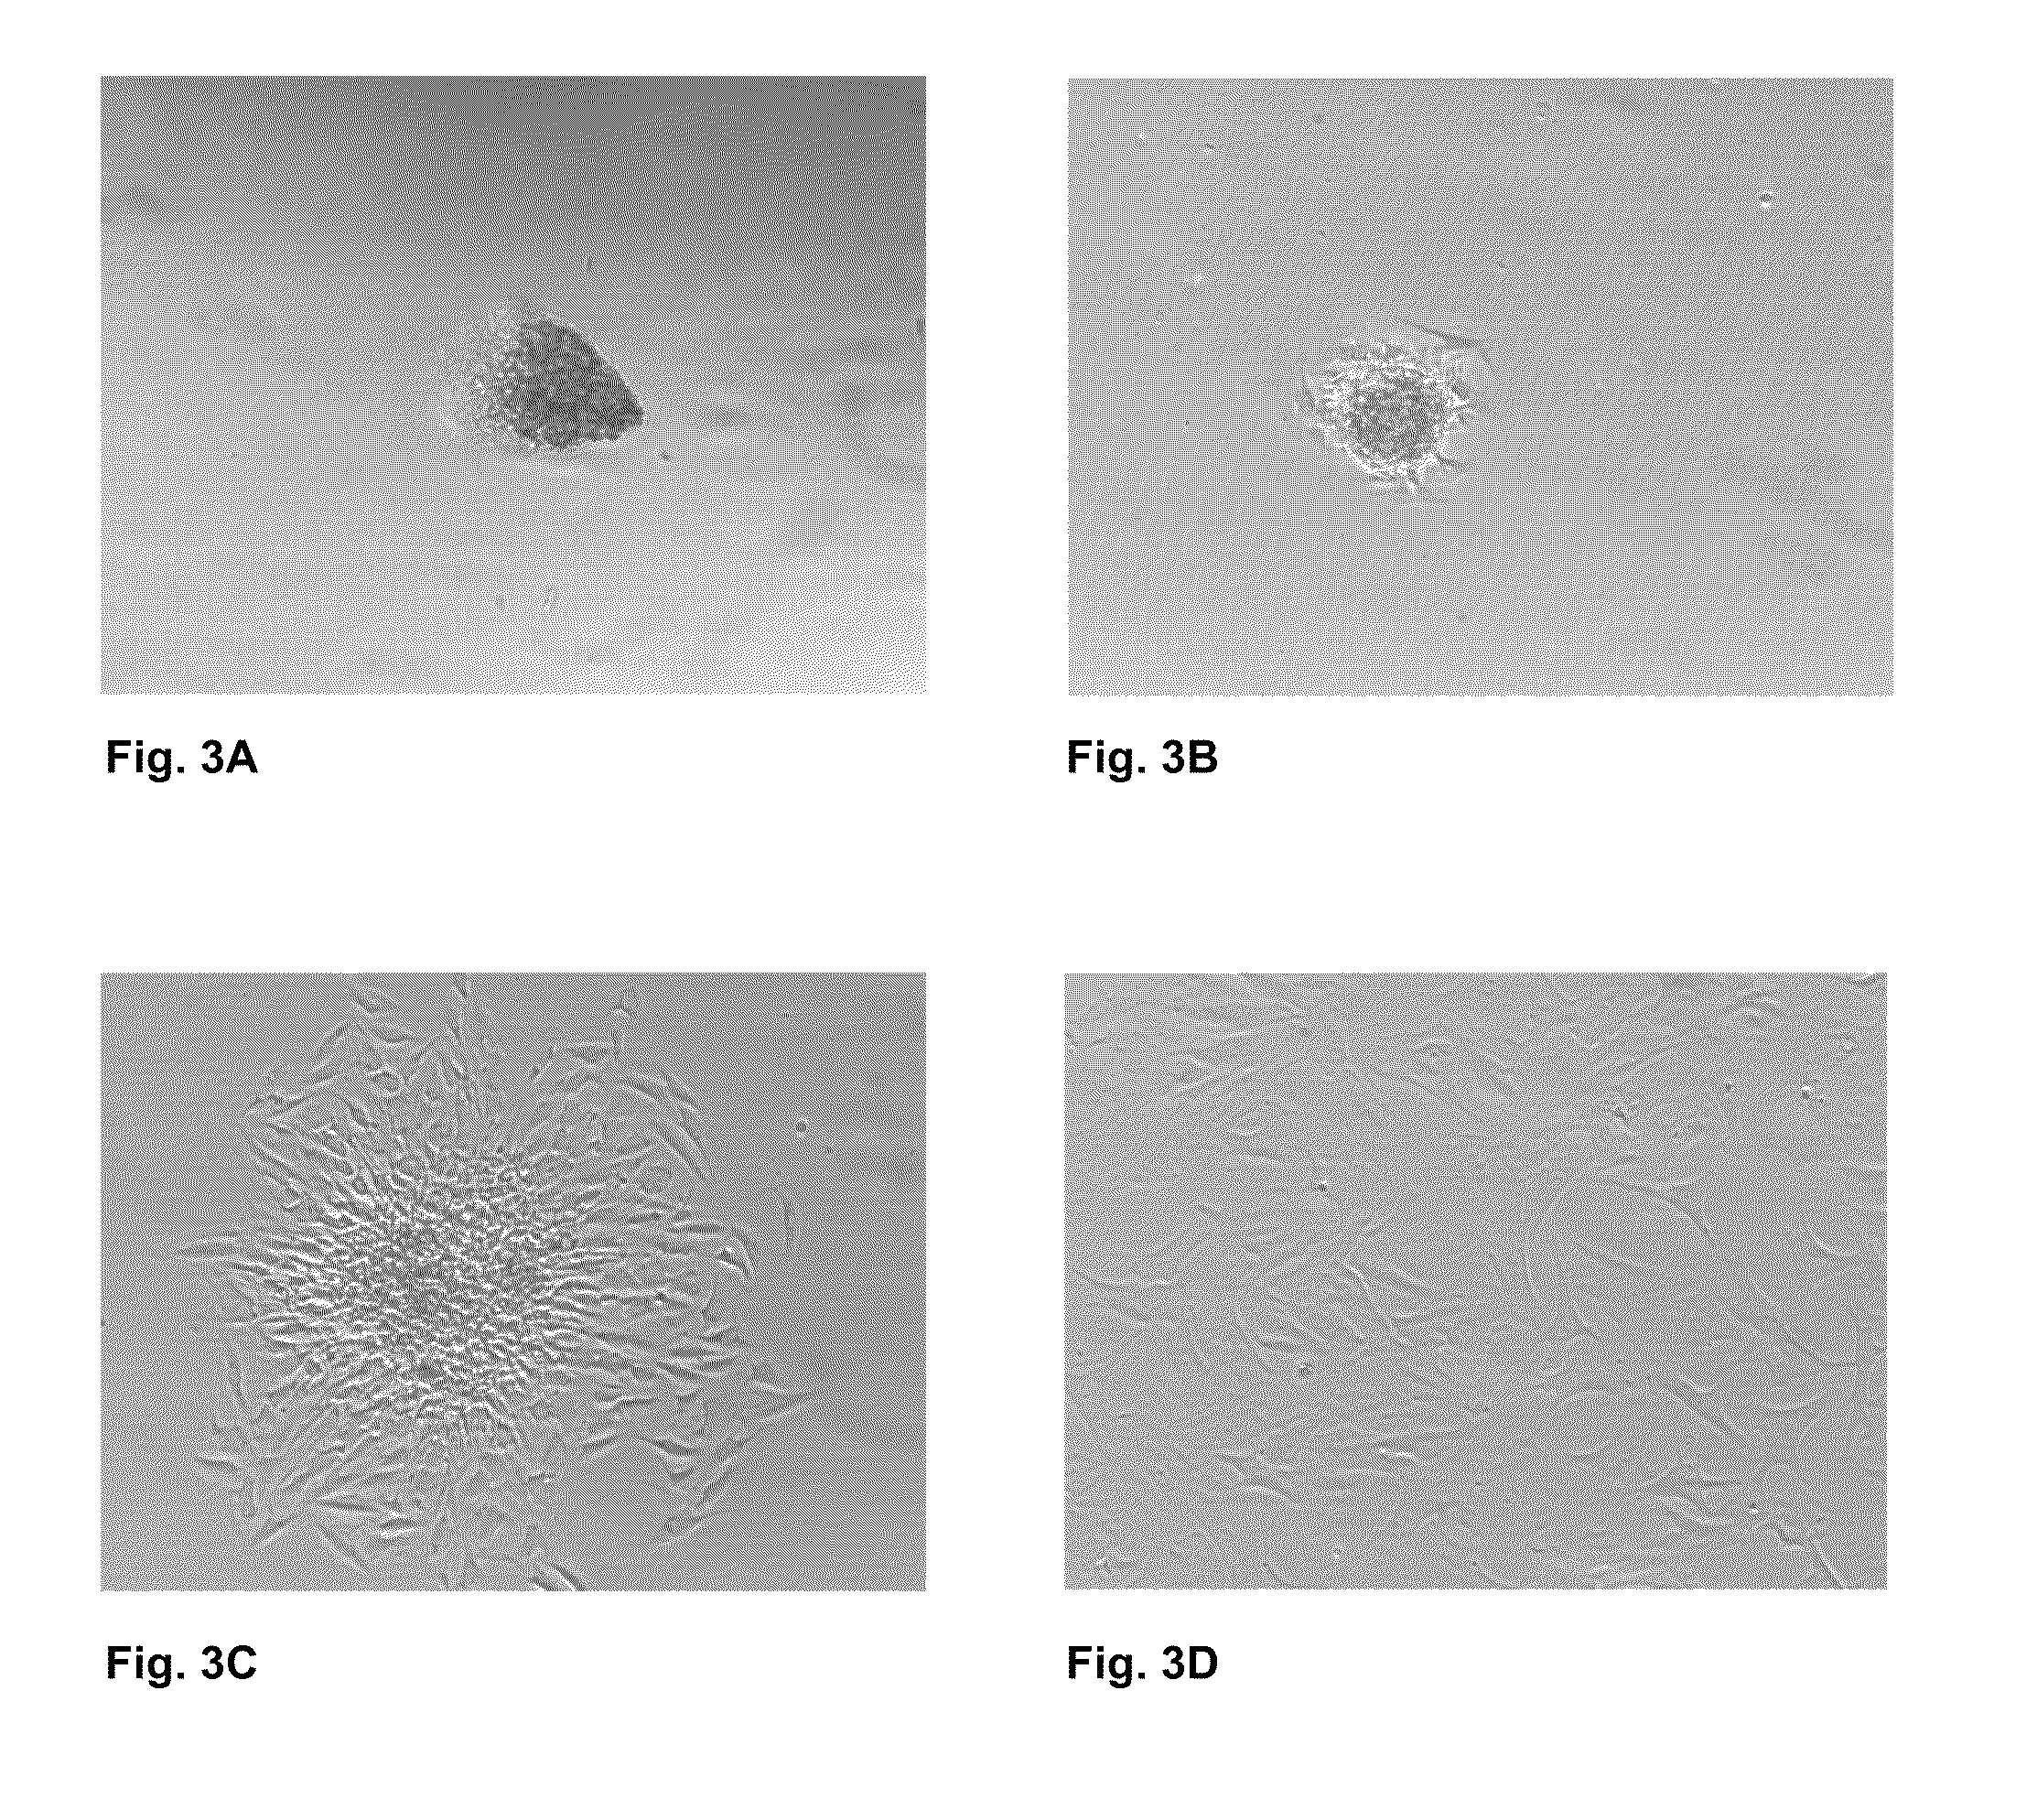 Cell Compositions and Methods for Hair Follicle Generation